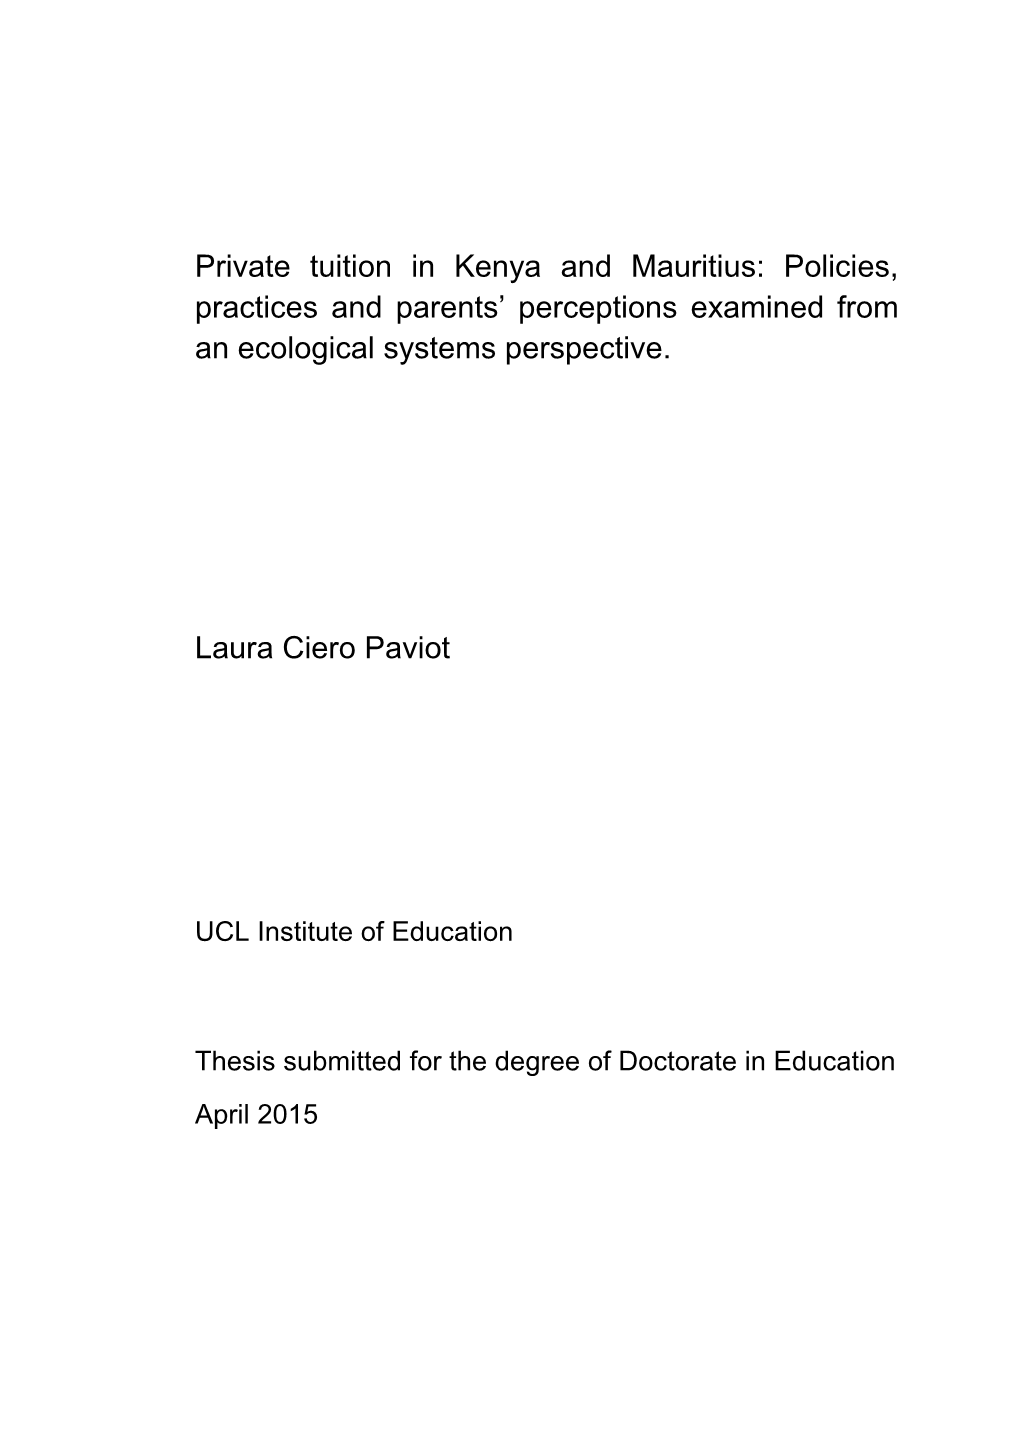 Private Tuition in Kenya and Mauritius: Policies, Practices and Parents’ Perceptions Examined from an Ecological Systems Perspective